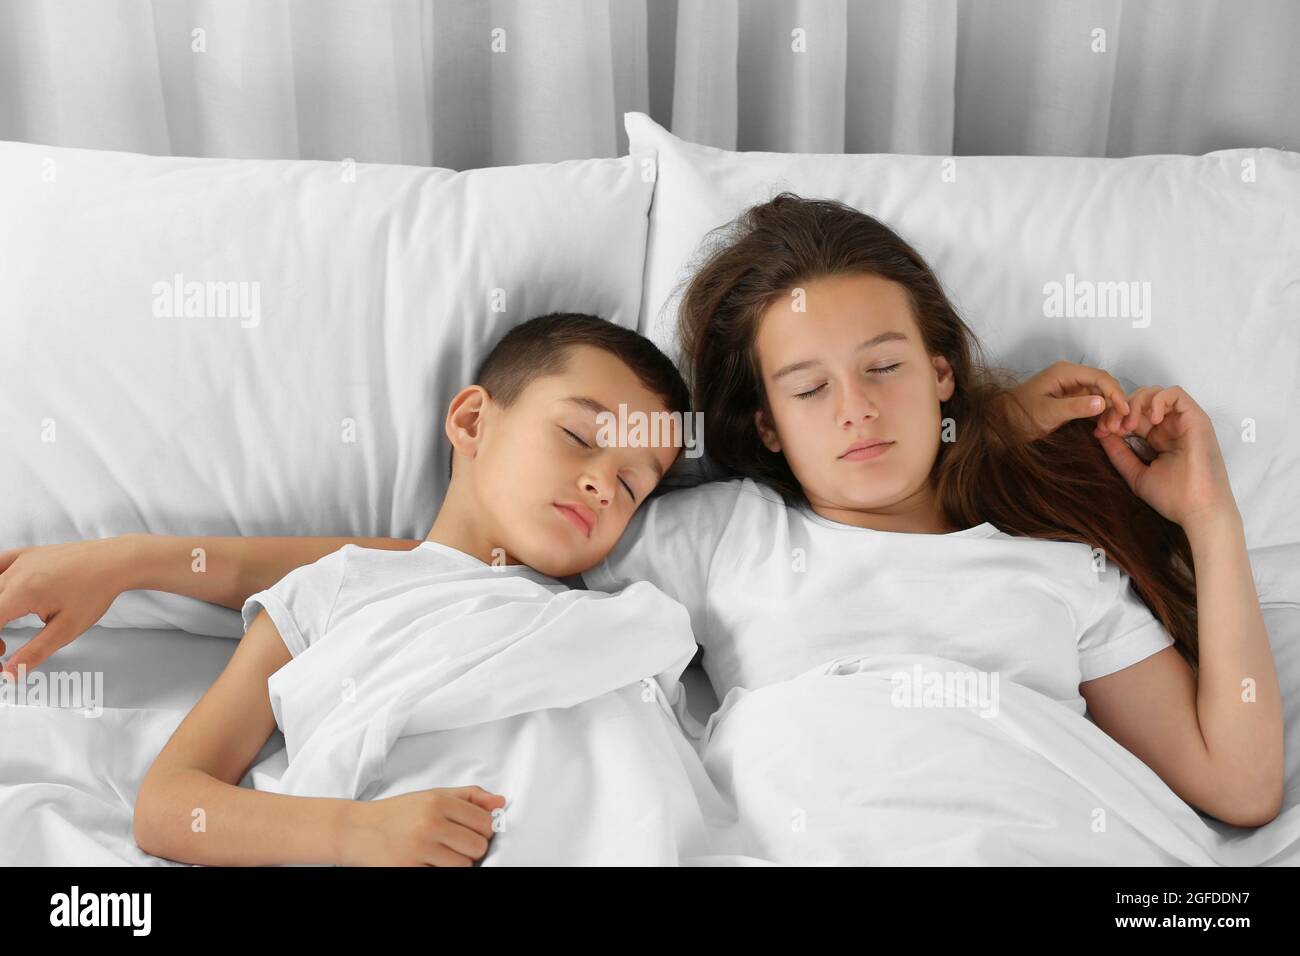 Brother and sister sleeping in bed Stock Photo